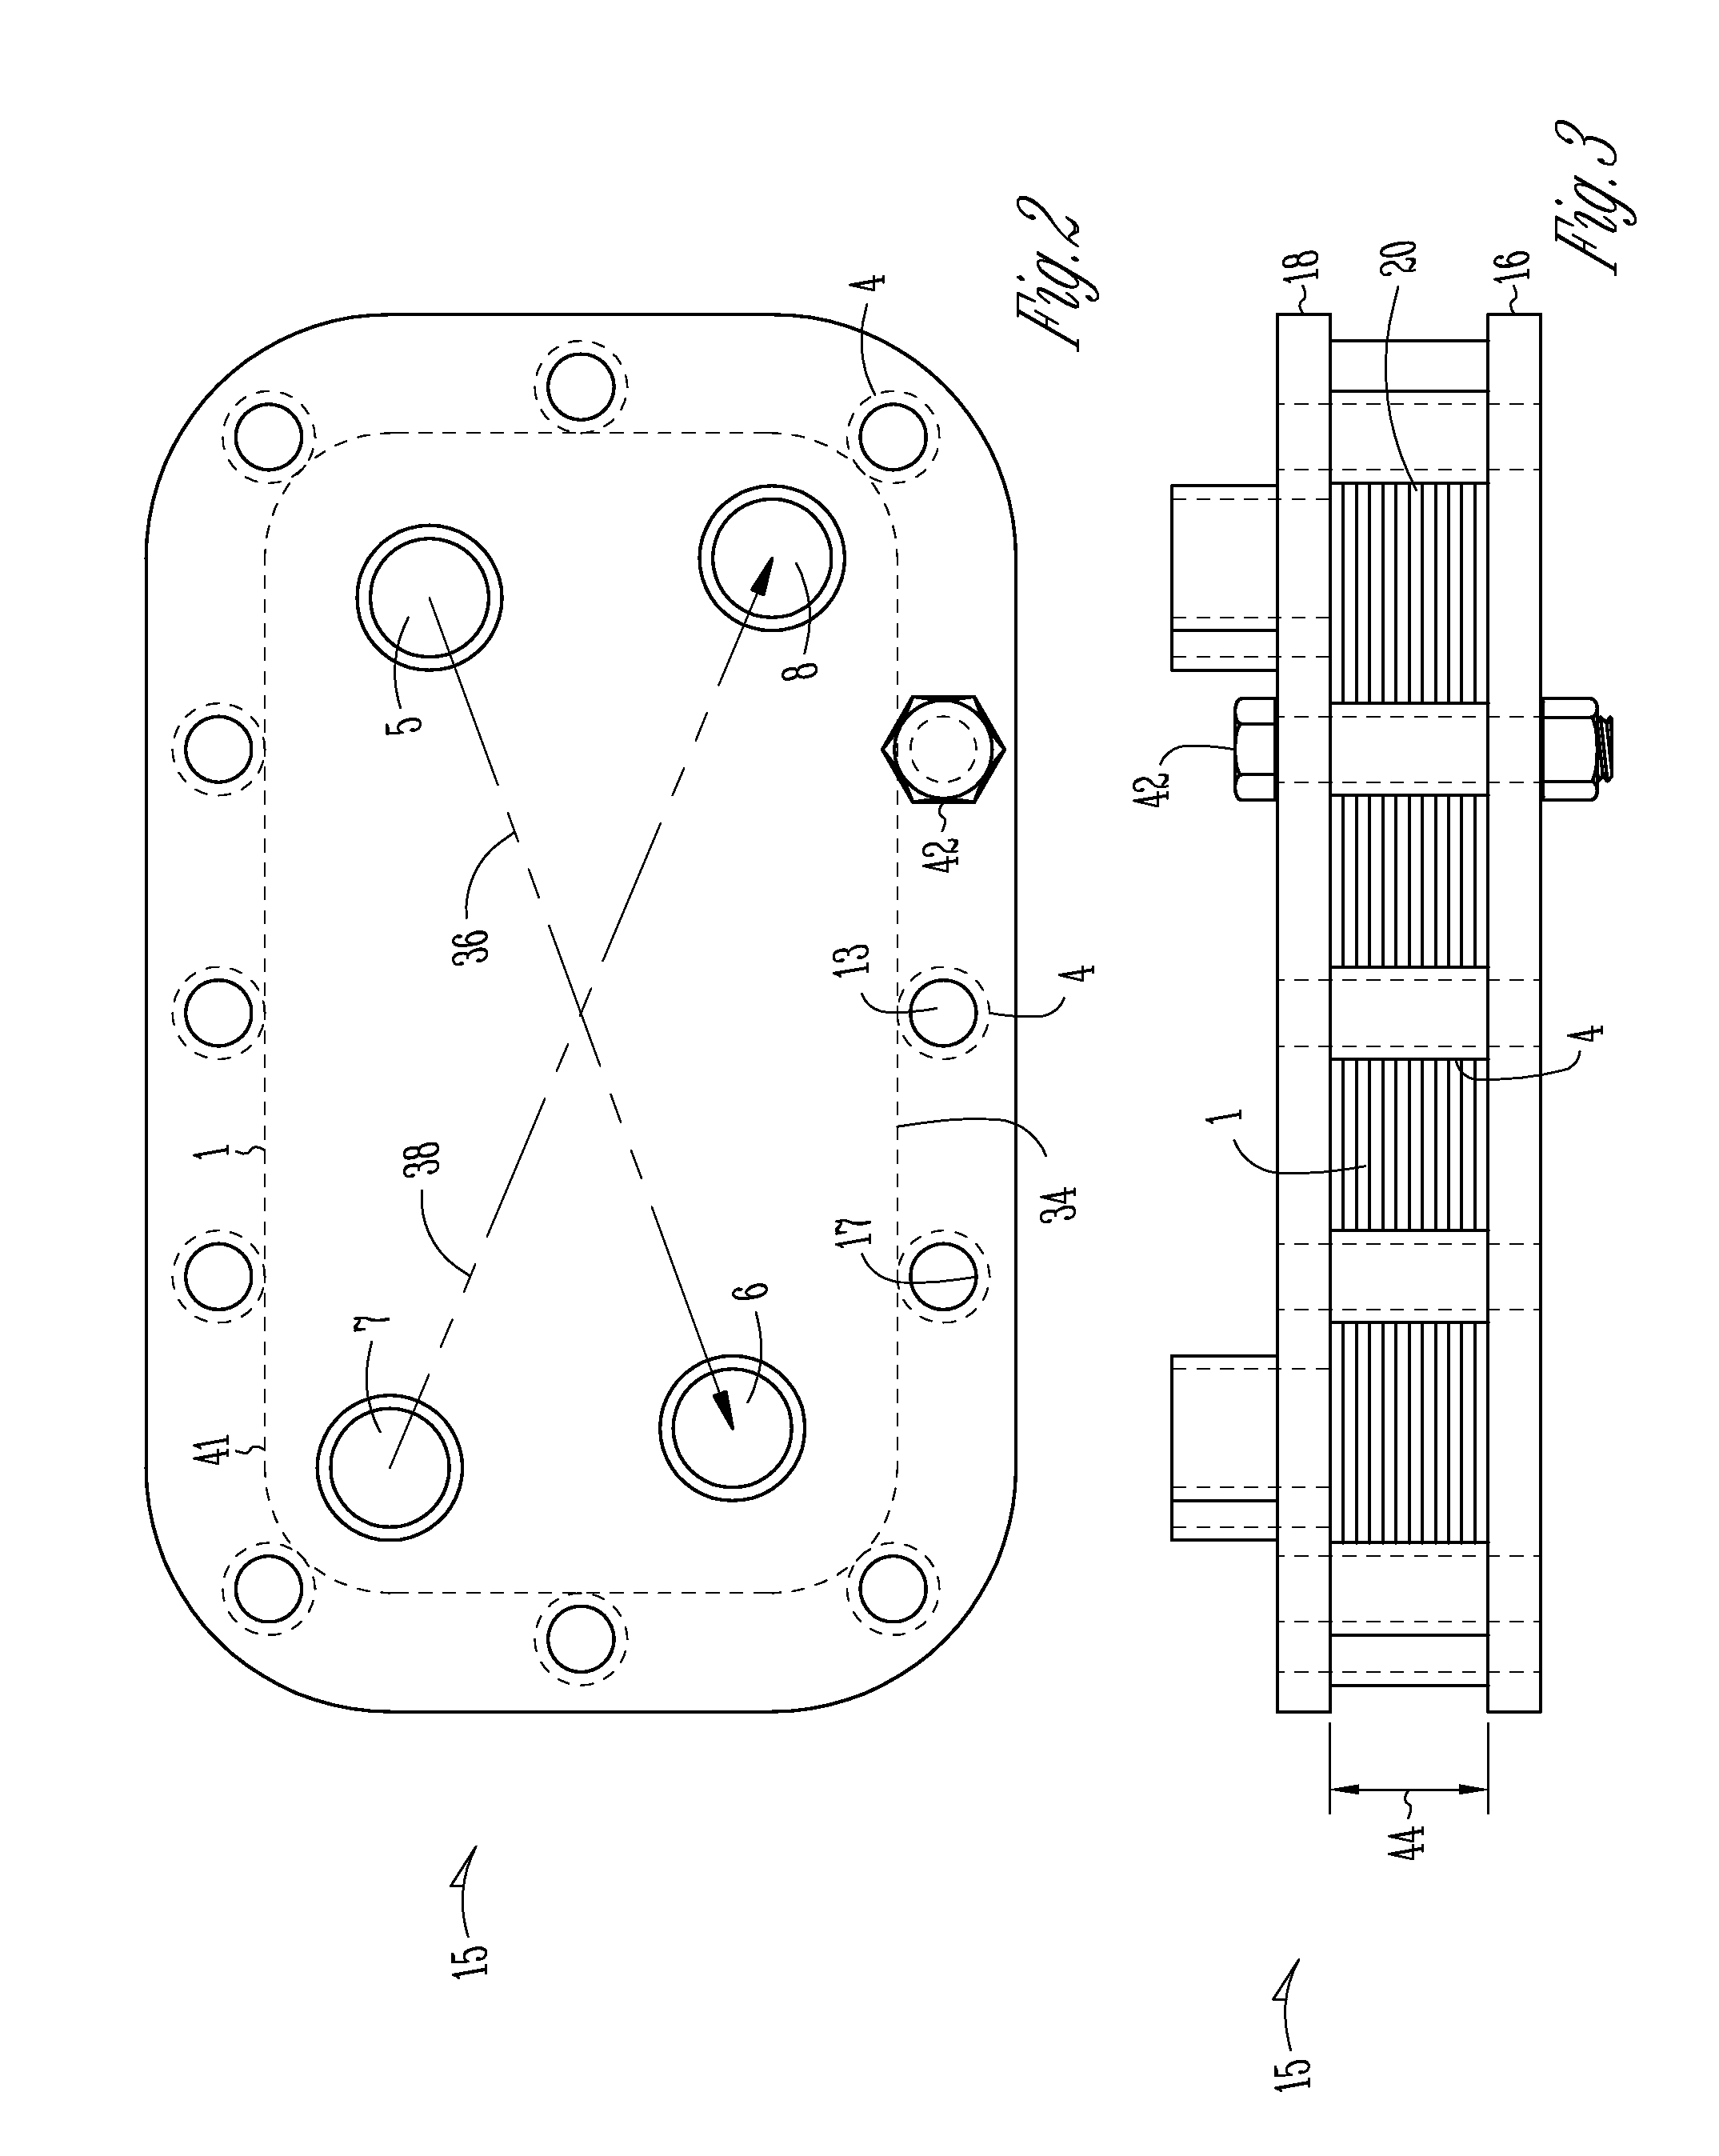 Polymer film heat exchanger with integral fluid distribution manifolds and method